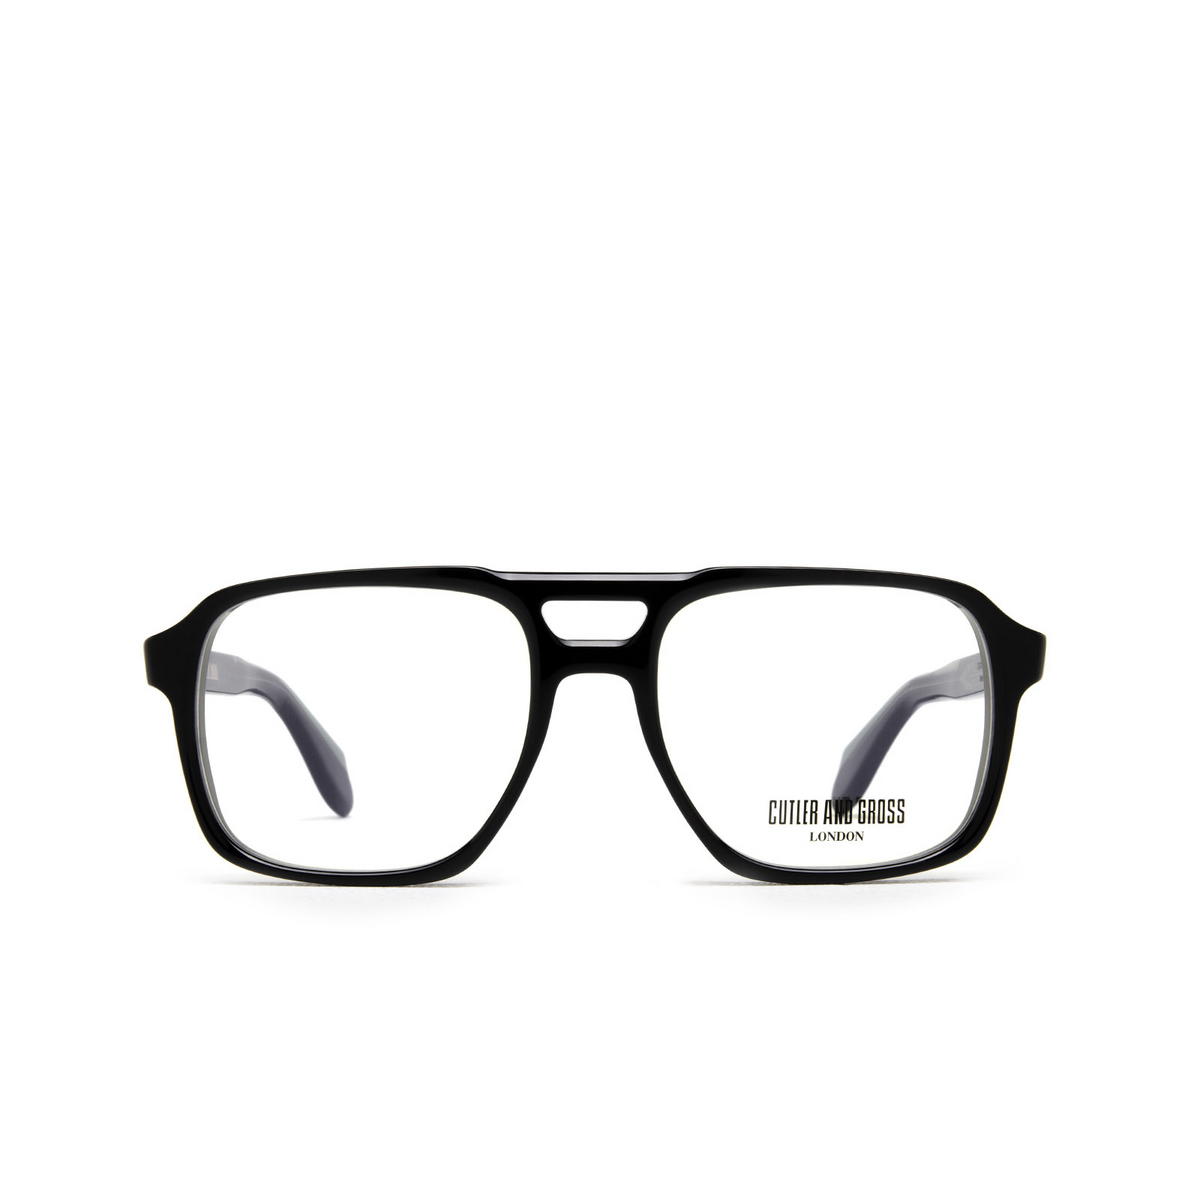 Cutler and Gross 1394 Eyeglasses 01 Black - front view